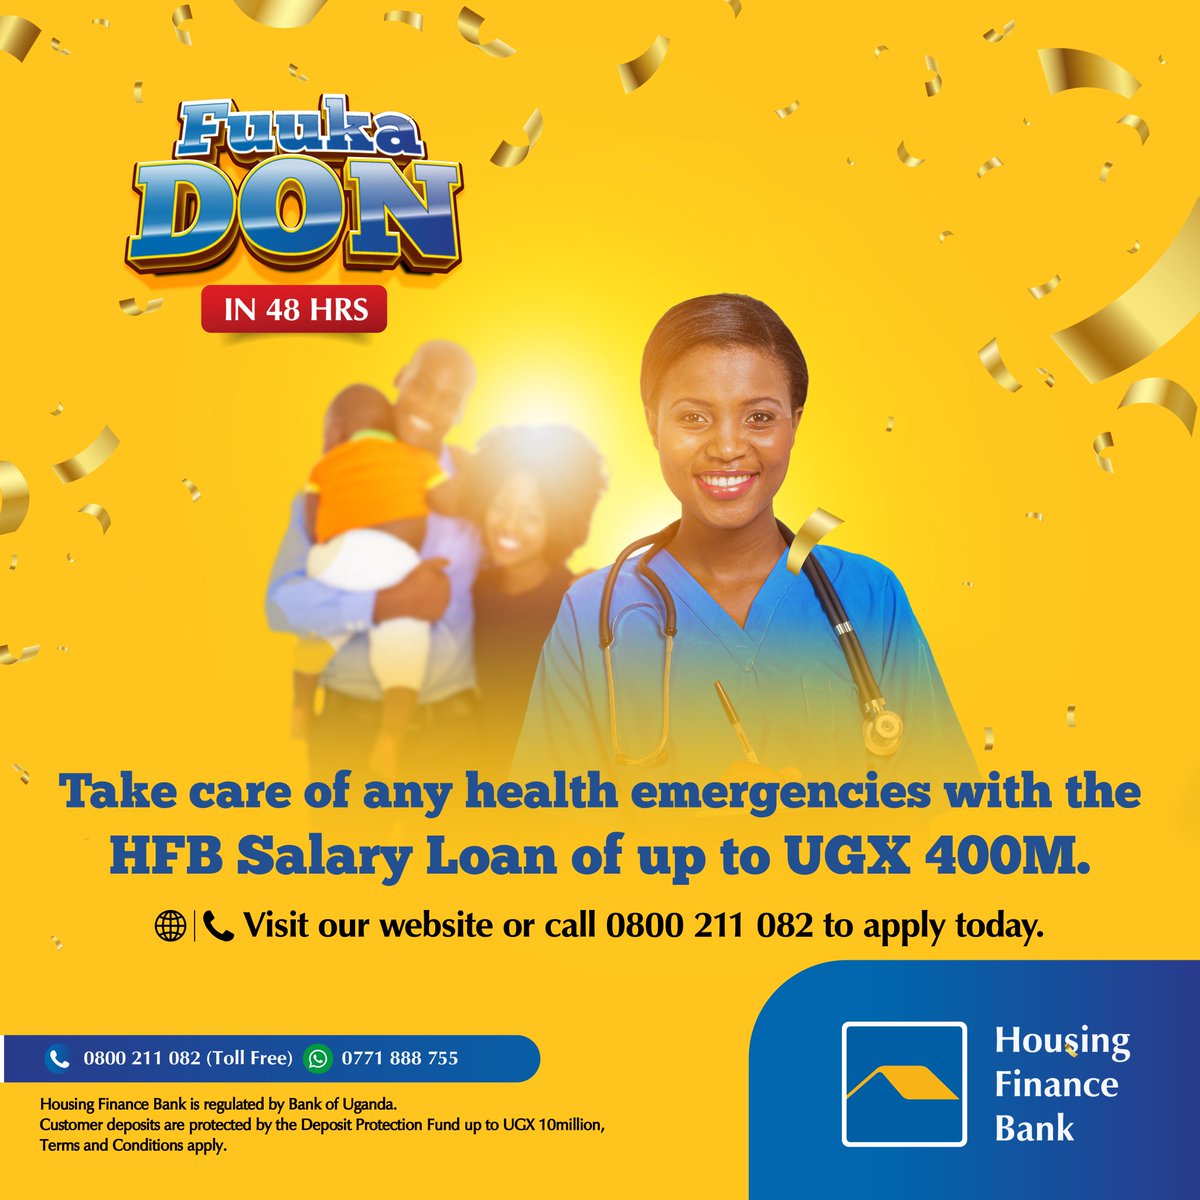 Keep you and your family covered. Attend to any health emergencies with the #HFBSalaryLoan.

To apply, visit bit.ly/3Sou5e3  or call 0800 211 082  and access up to UGX 400M in just 48 hours. 

T&Cs apply

#WeMakeItEasy 
#FuukaDon